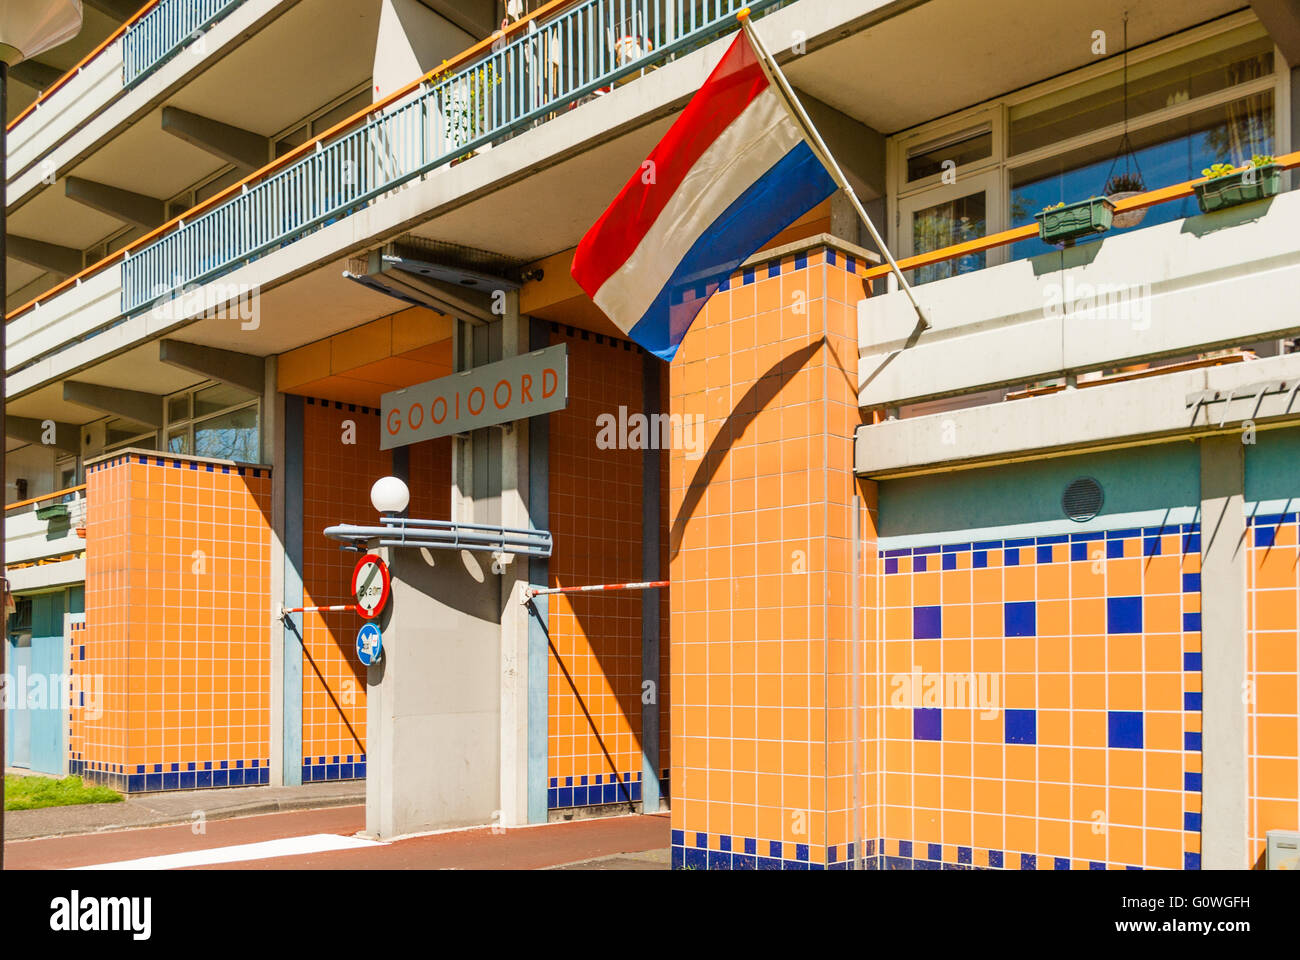 Amsterdam, the Netherlands, 05th May, 2016. On May 5th, Liberation day of the Netherlands, the red-blue-white national flag is seen everywhere. Like here on Gooioord, one of the typical Bijlmer appartment buildings in Amsterdam Southeast. Credit:  Steppeland/Alamy Live News Stock Photo